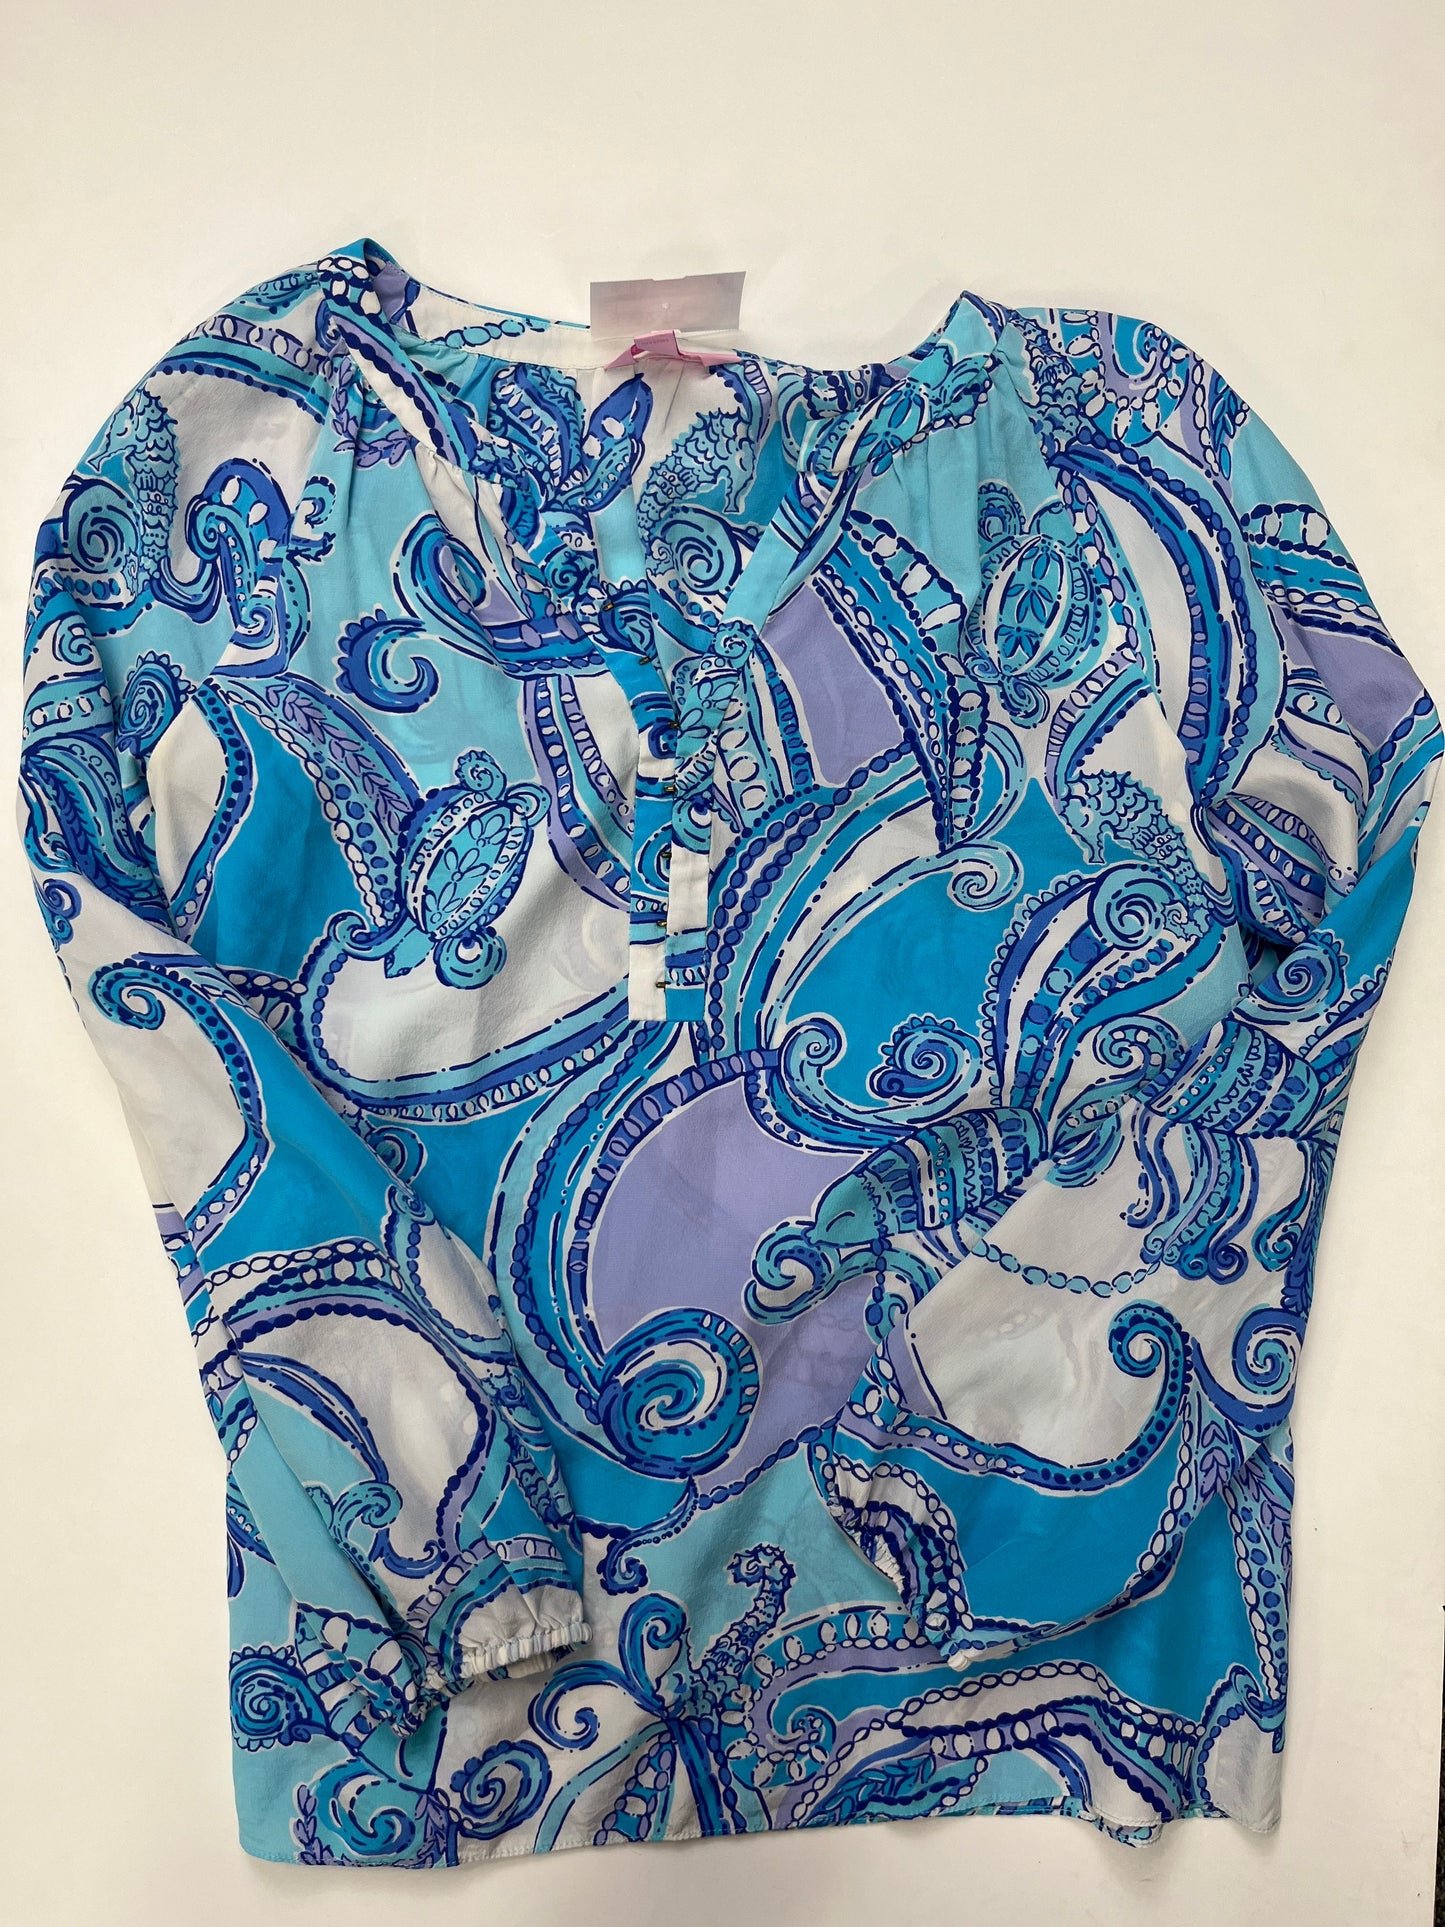 Blue Blouse Long Sleeve Lilly Pulitzer, Size M